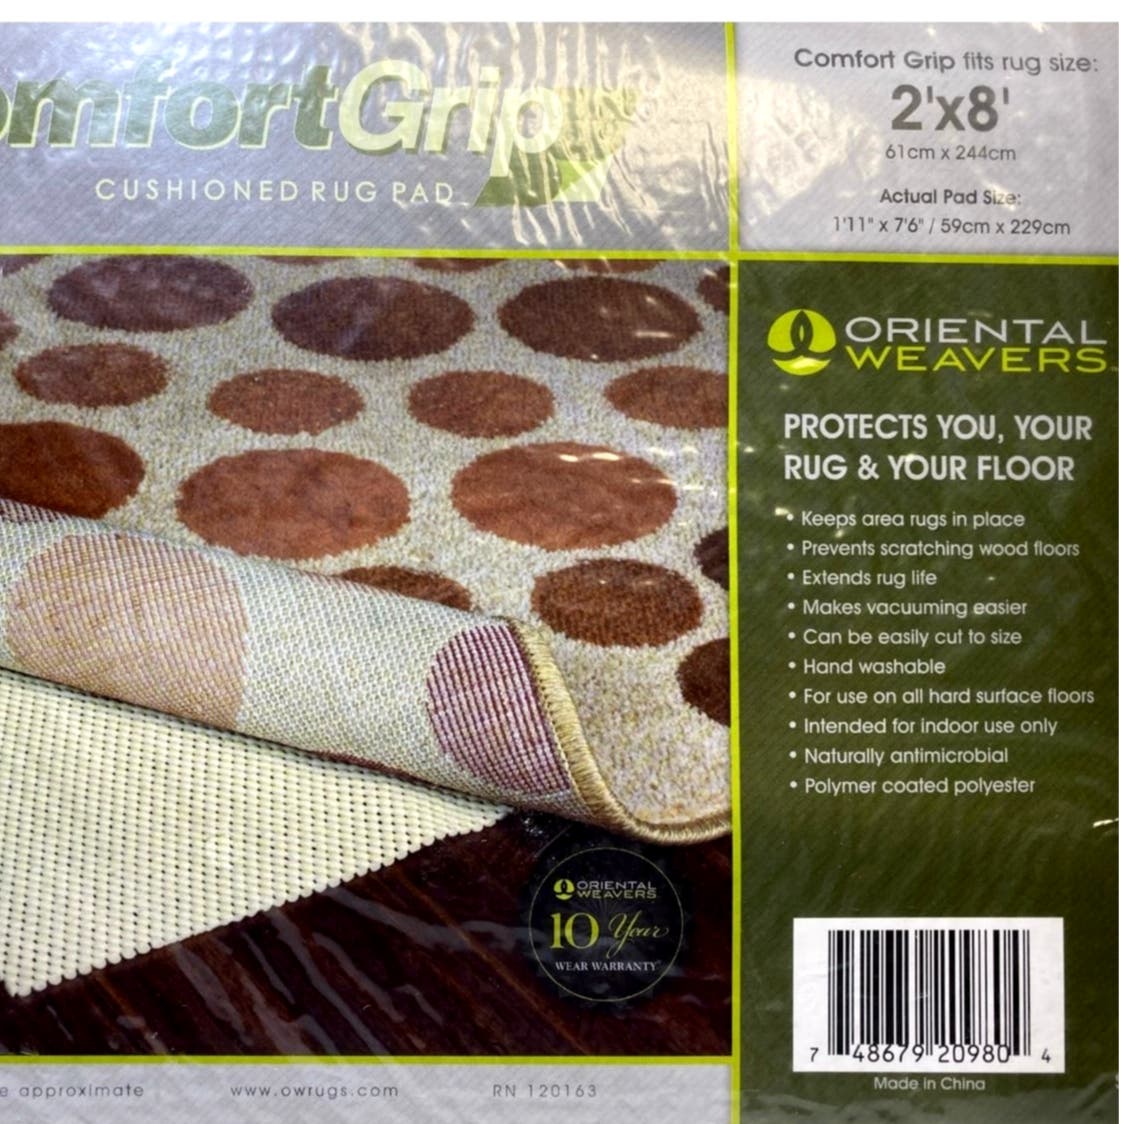 Non Slip Rug Pad Comfort Grip 2 X 8 Feet Pad for Any Hard Surface Floor NEW